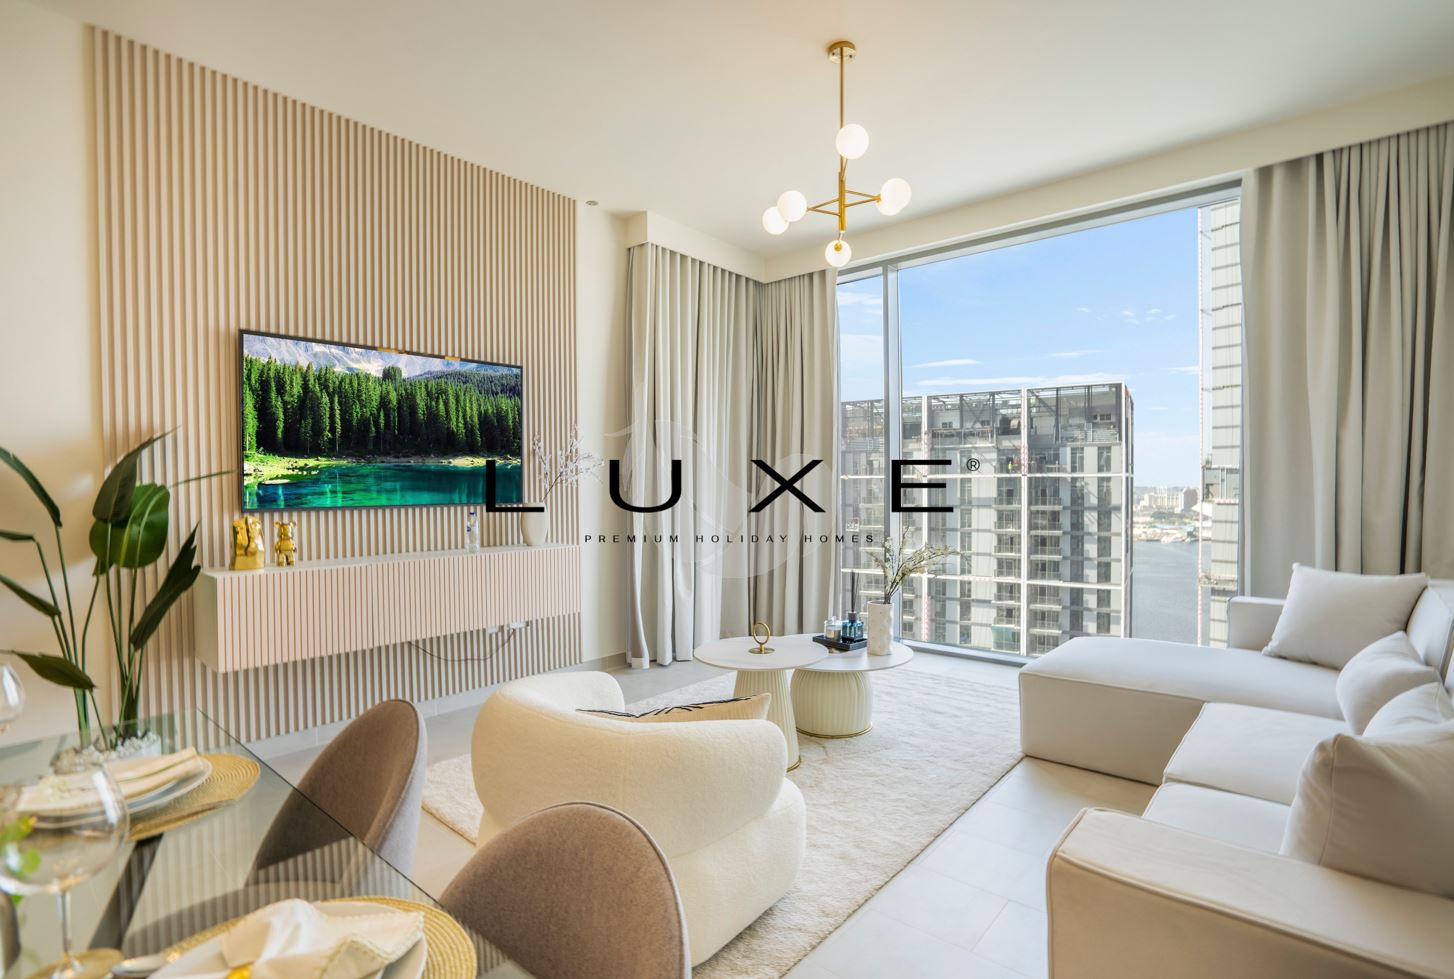 LUXE PREMIUM HOLIDAY HOMES LLC